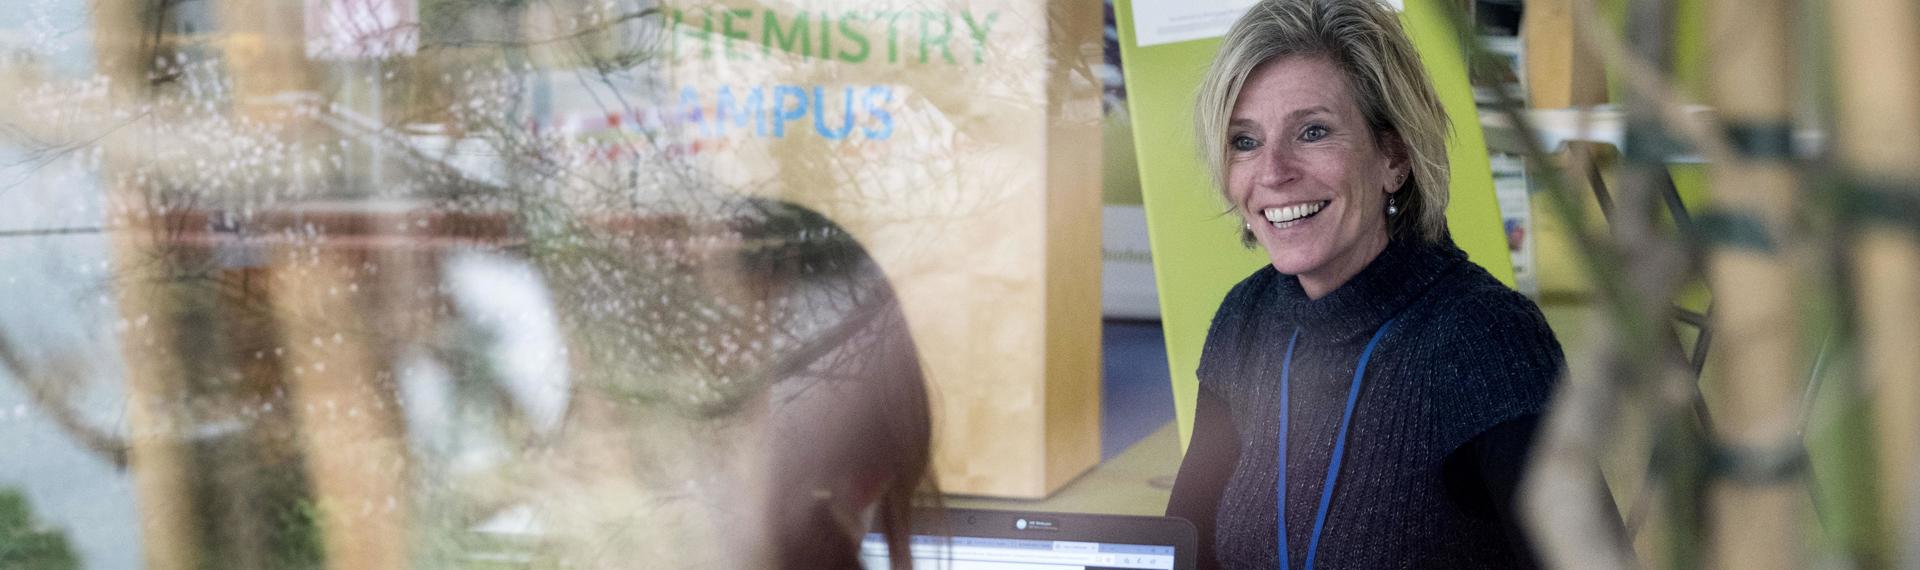 Petra Koenders talks about working at the Green Chemistry Campus in Bergen op Zoom